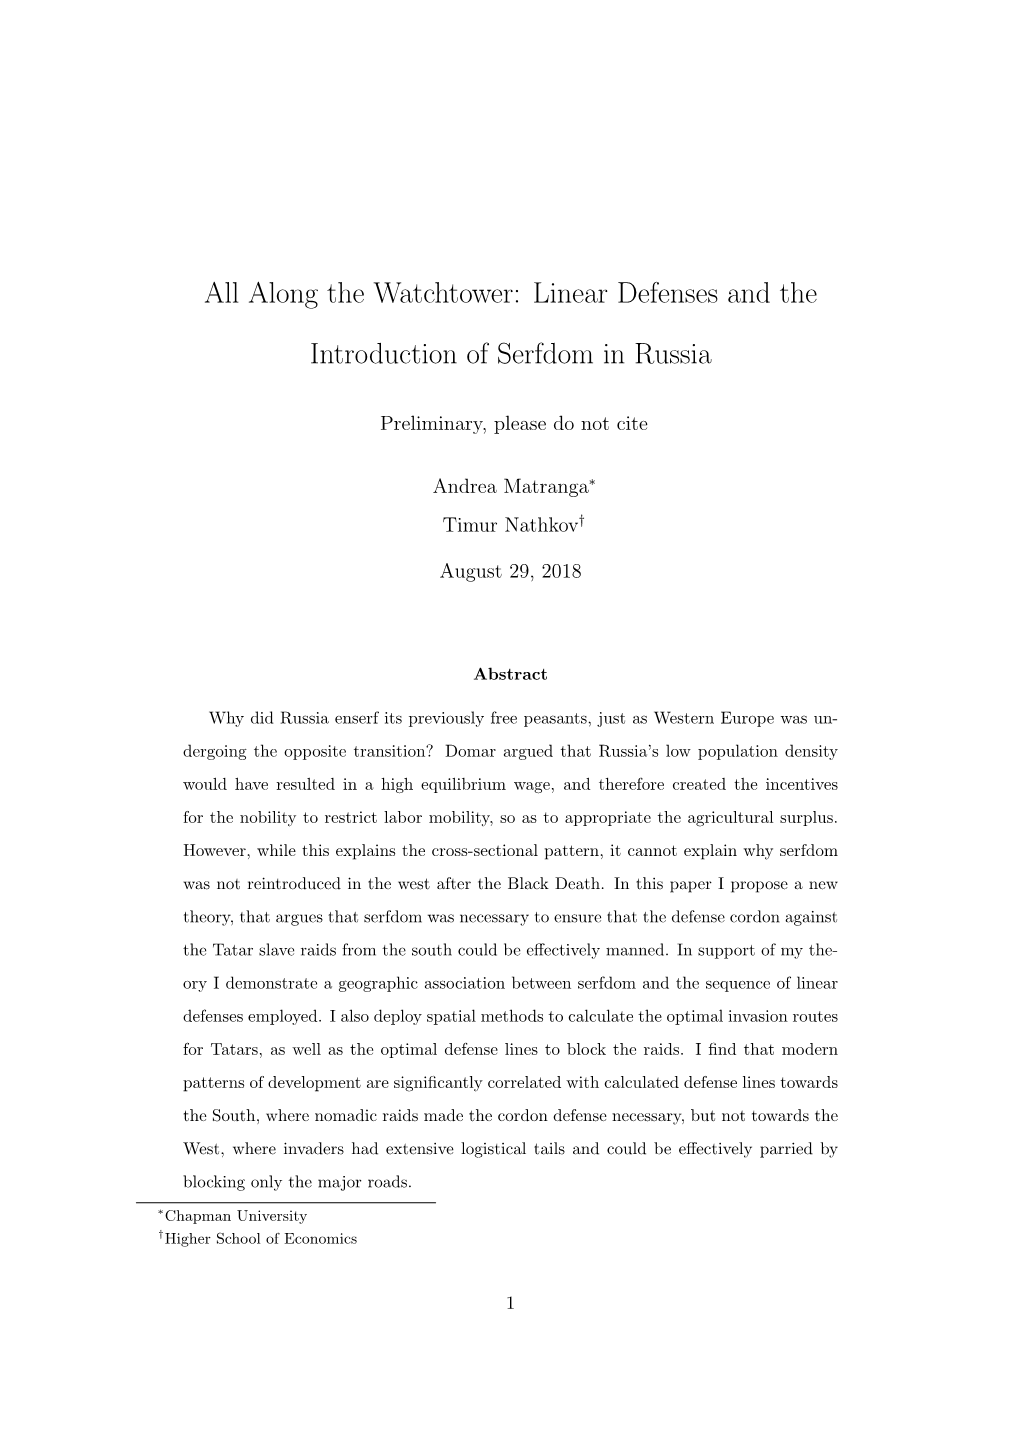 All Along the Watchtower: Linear Defenses and the Introduction of Serfdom in Russia